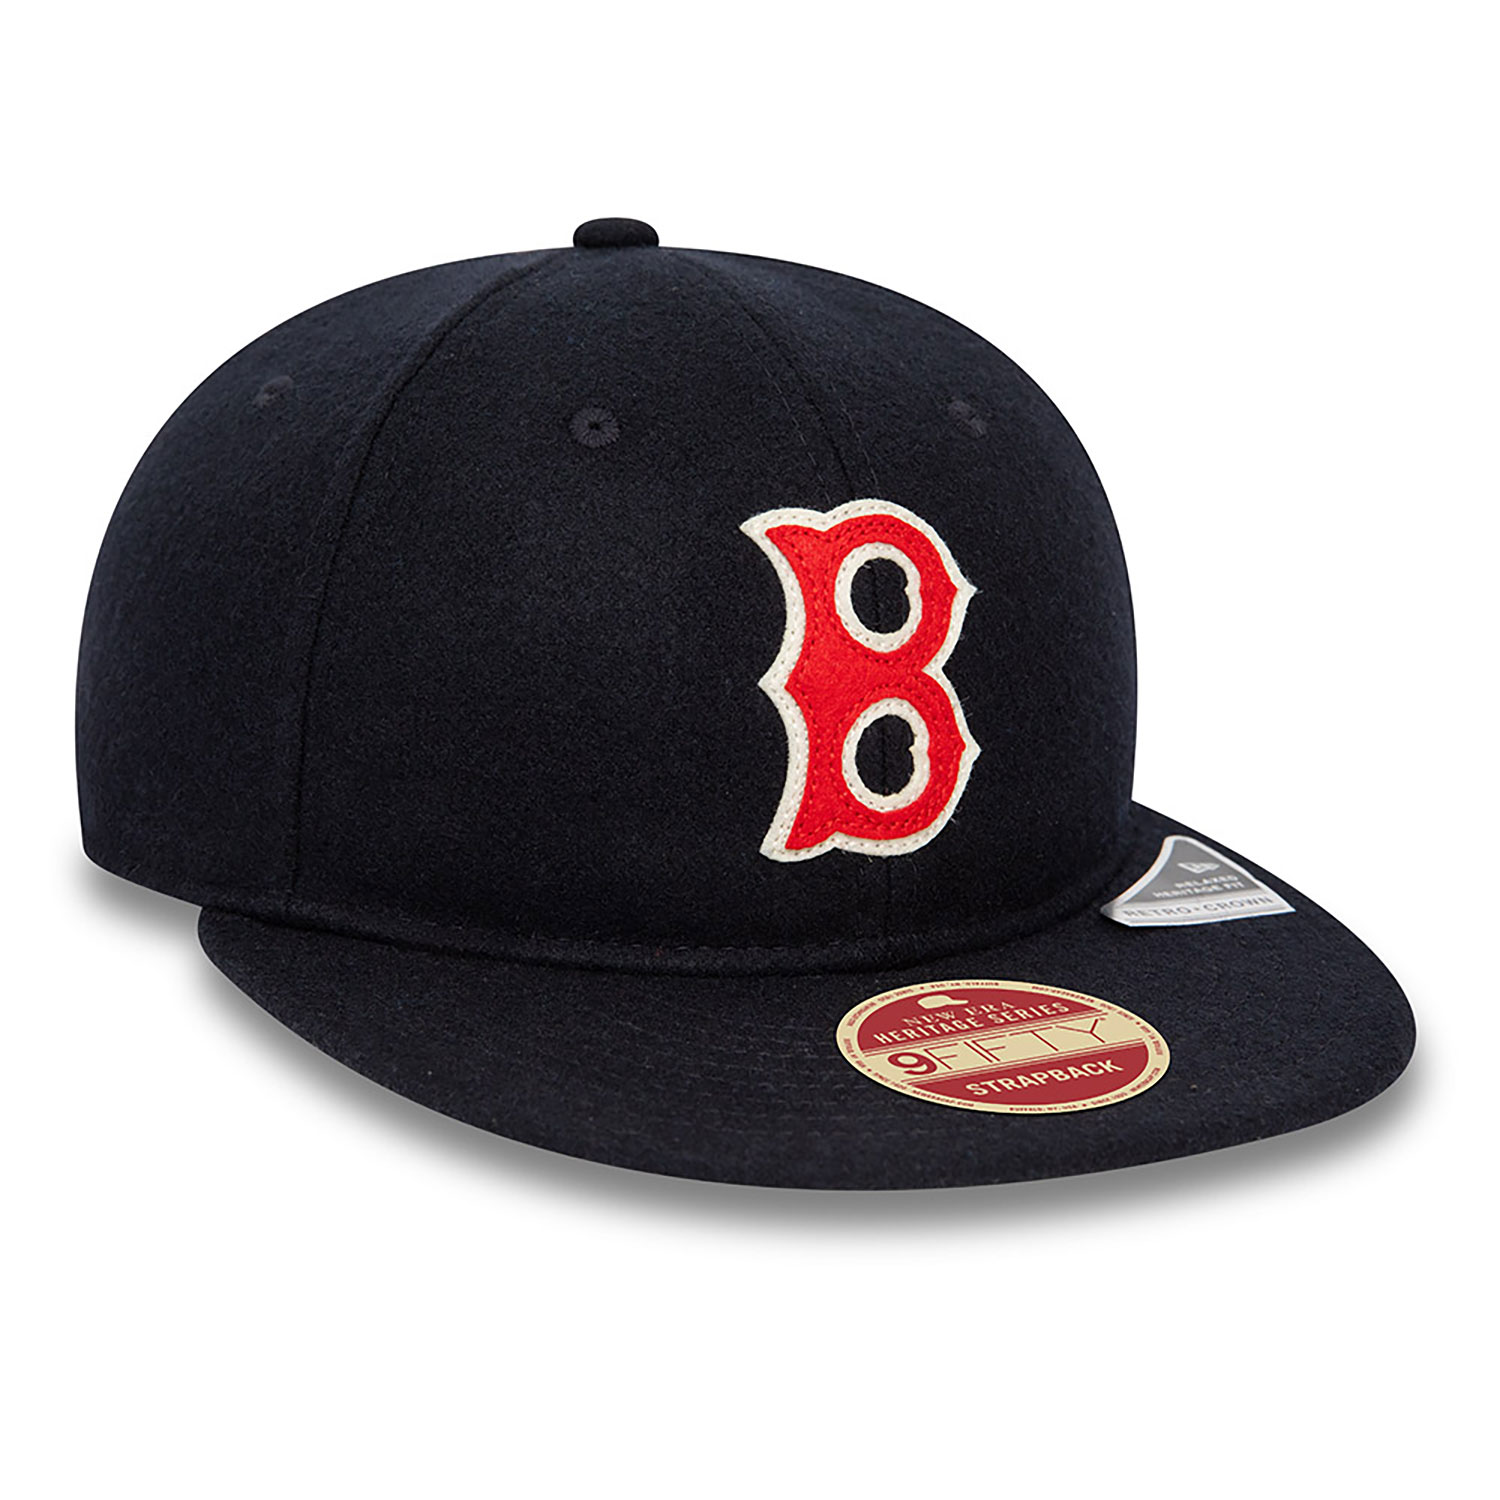 Boston Red Sox Heritage Series Navy Retro Crown 9FIFTY Strapback Cap